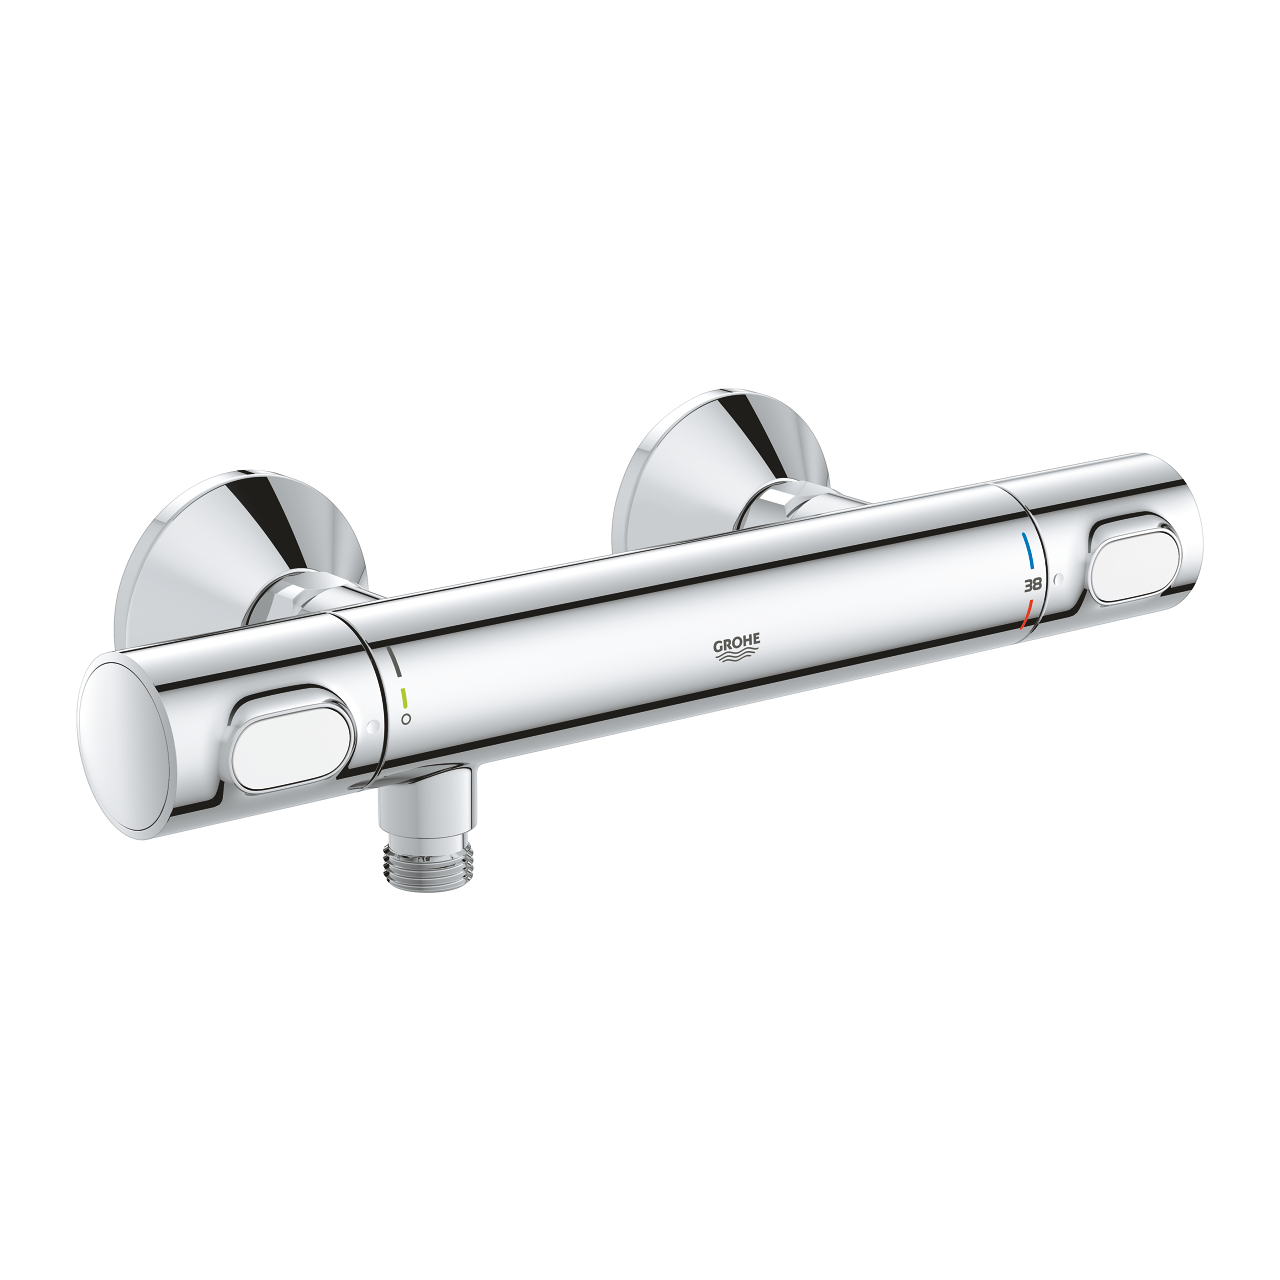 Baterie Dus Termostatata Grohe Precision Flow Crom ( 31.g 34840000.GHR )